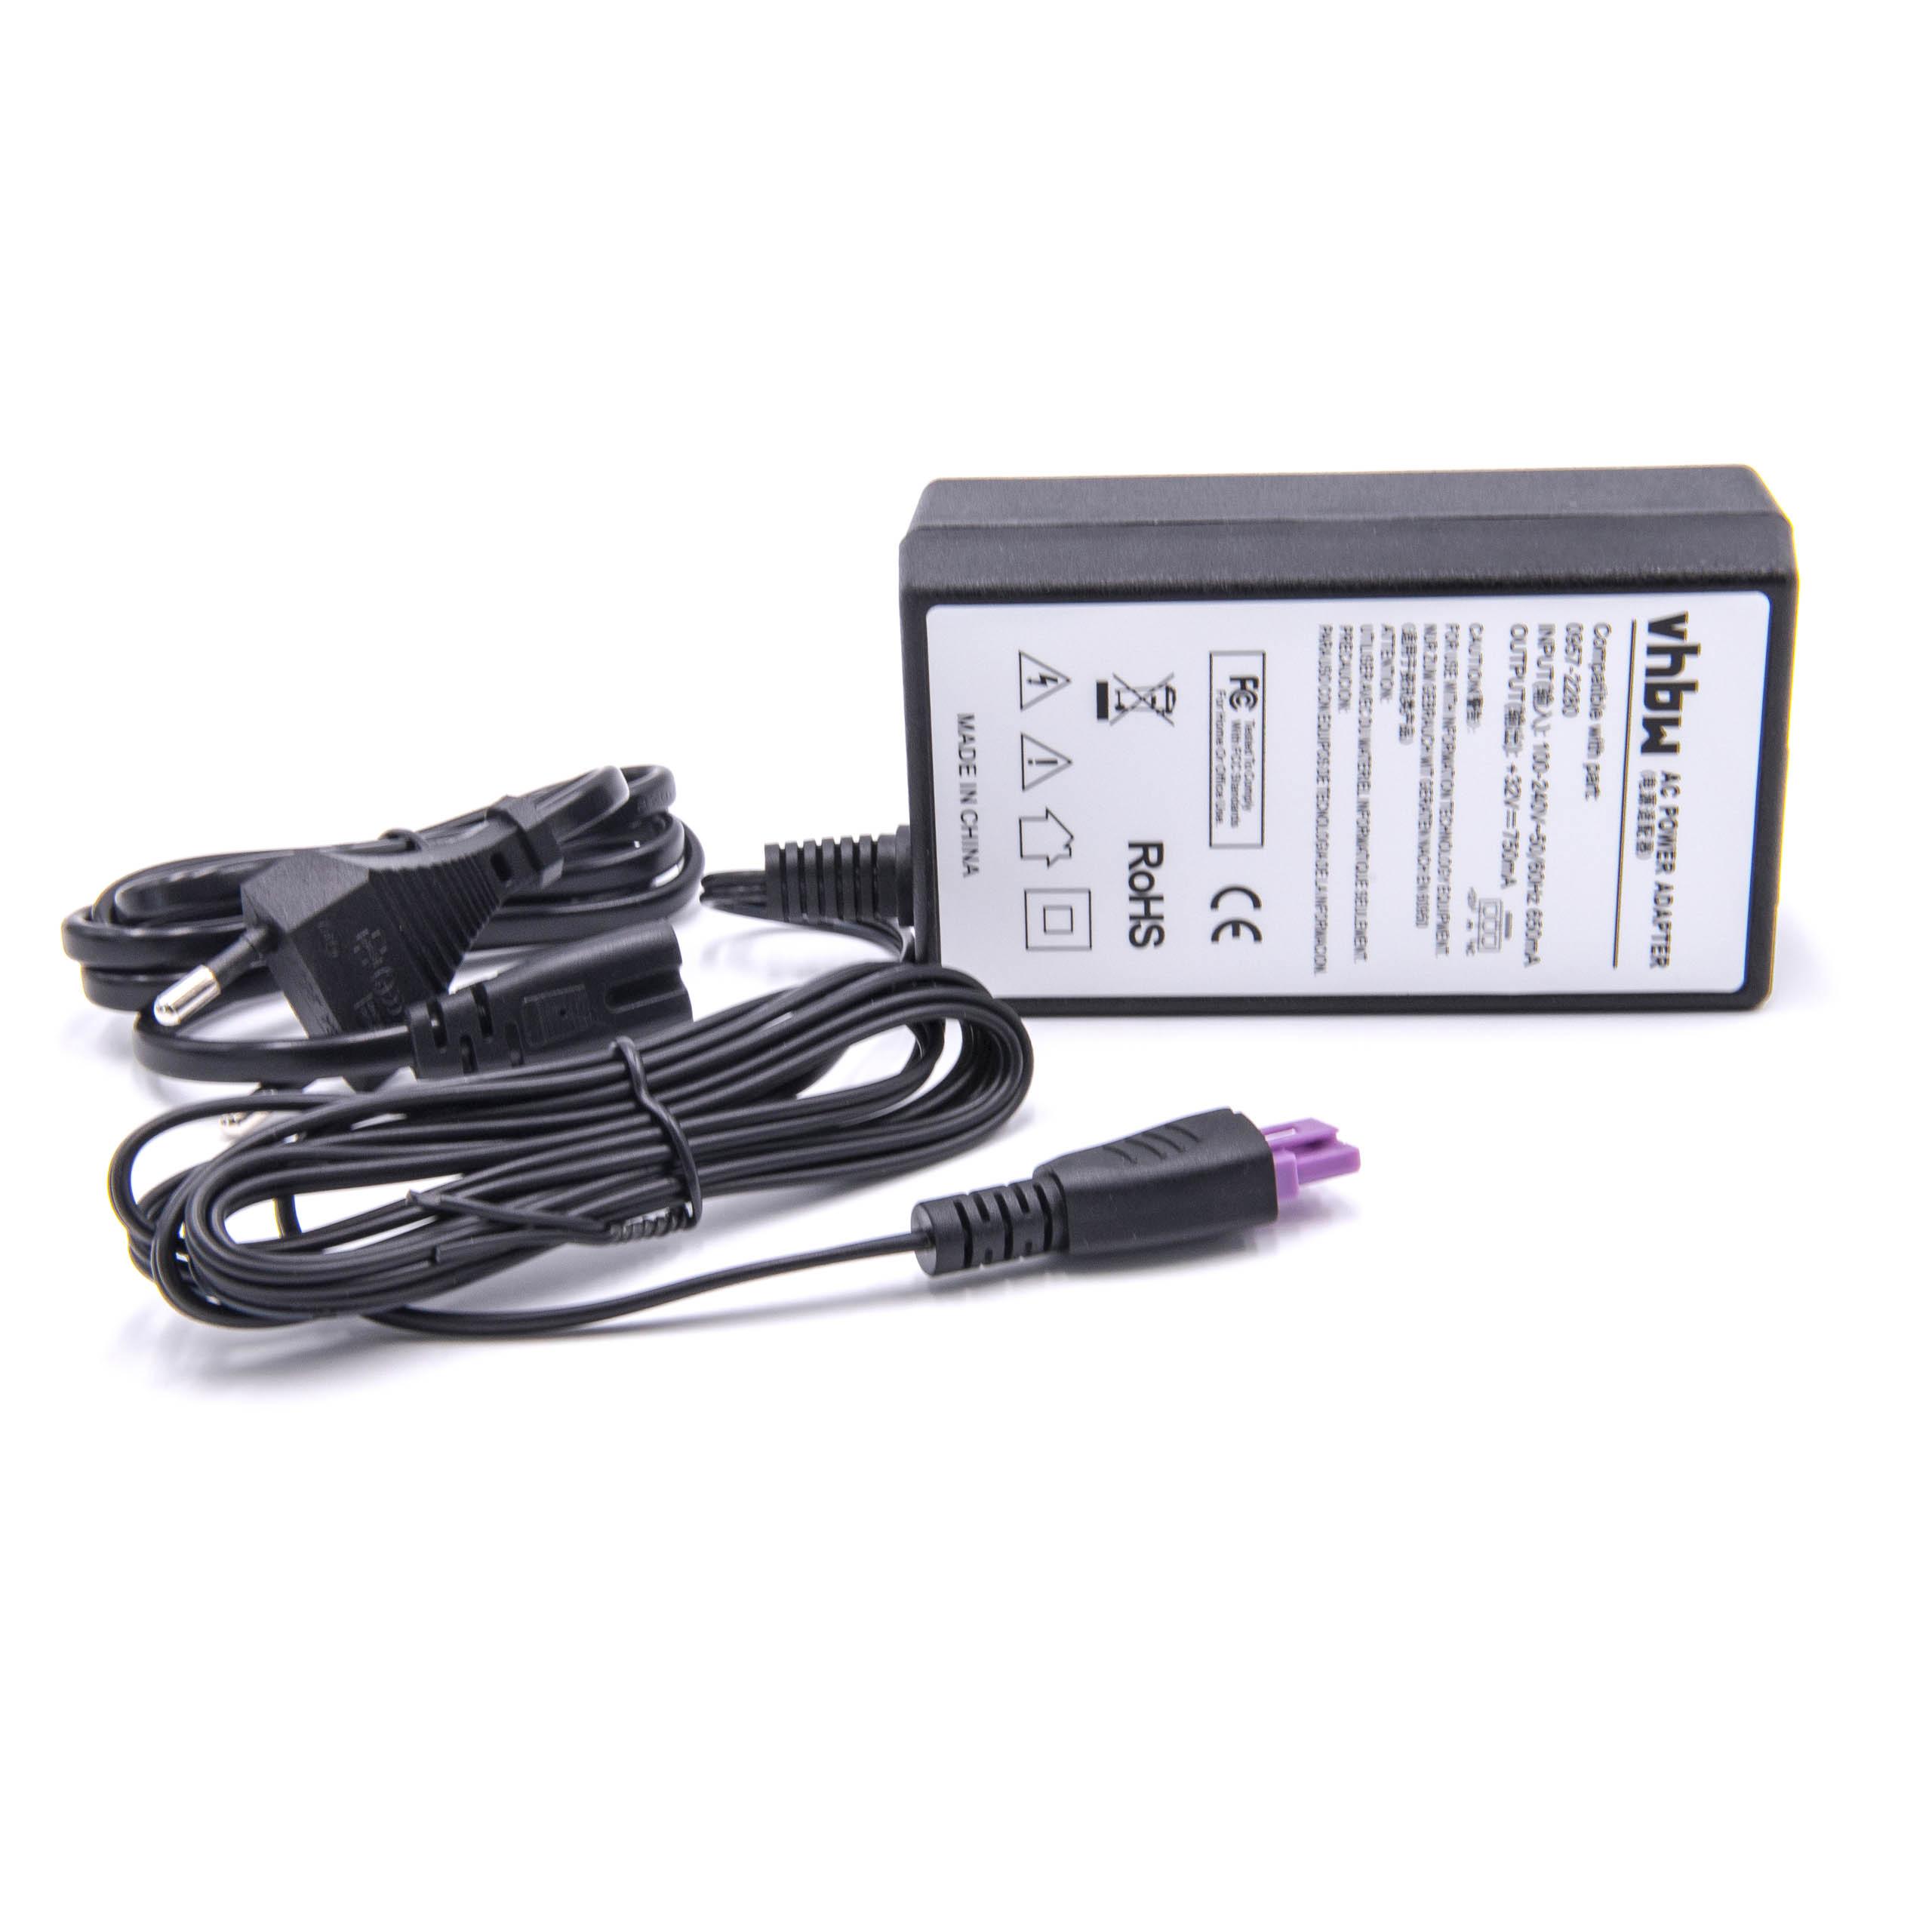 Mains Power Adapter replaces HP 0957-2280 for Printer